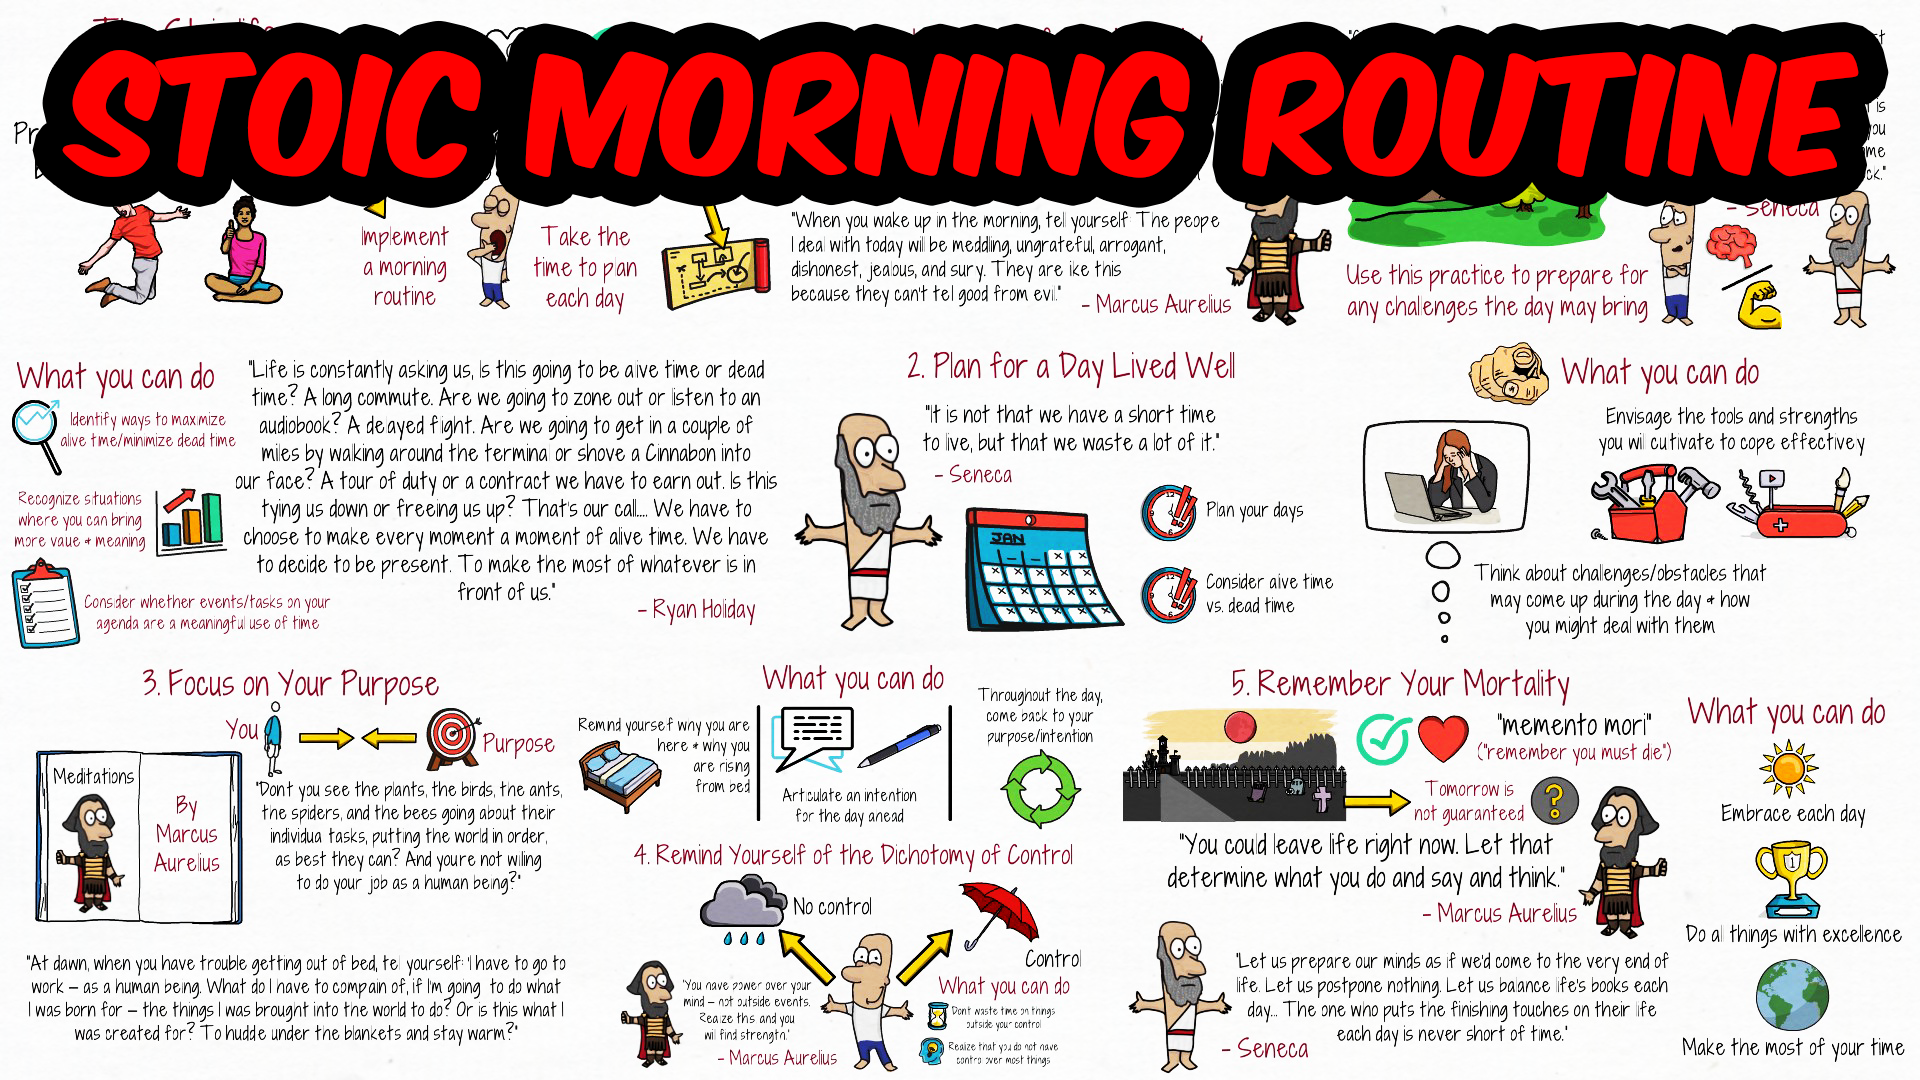 5 Practices from Stoic Philosophy to Include in Your Morning Routine